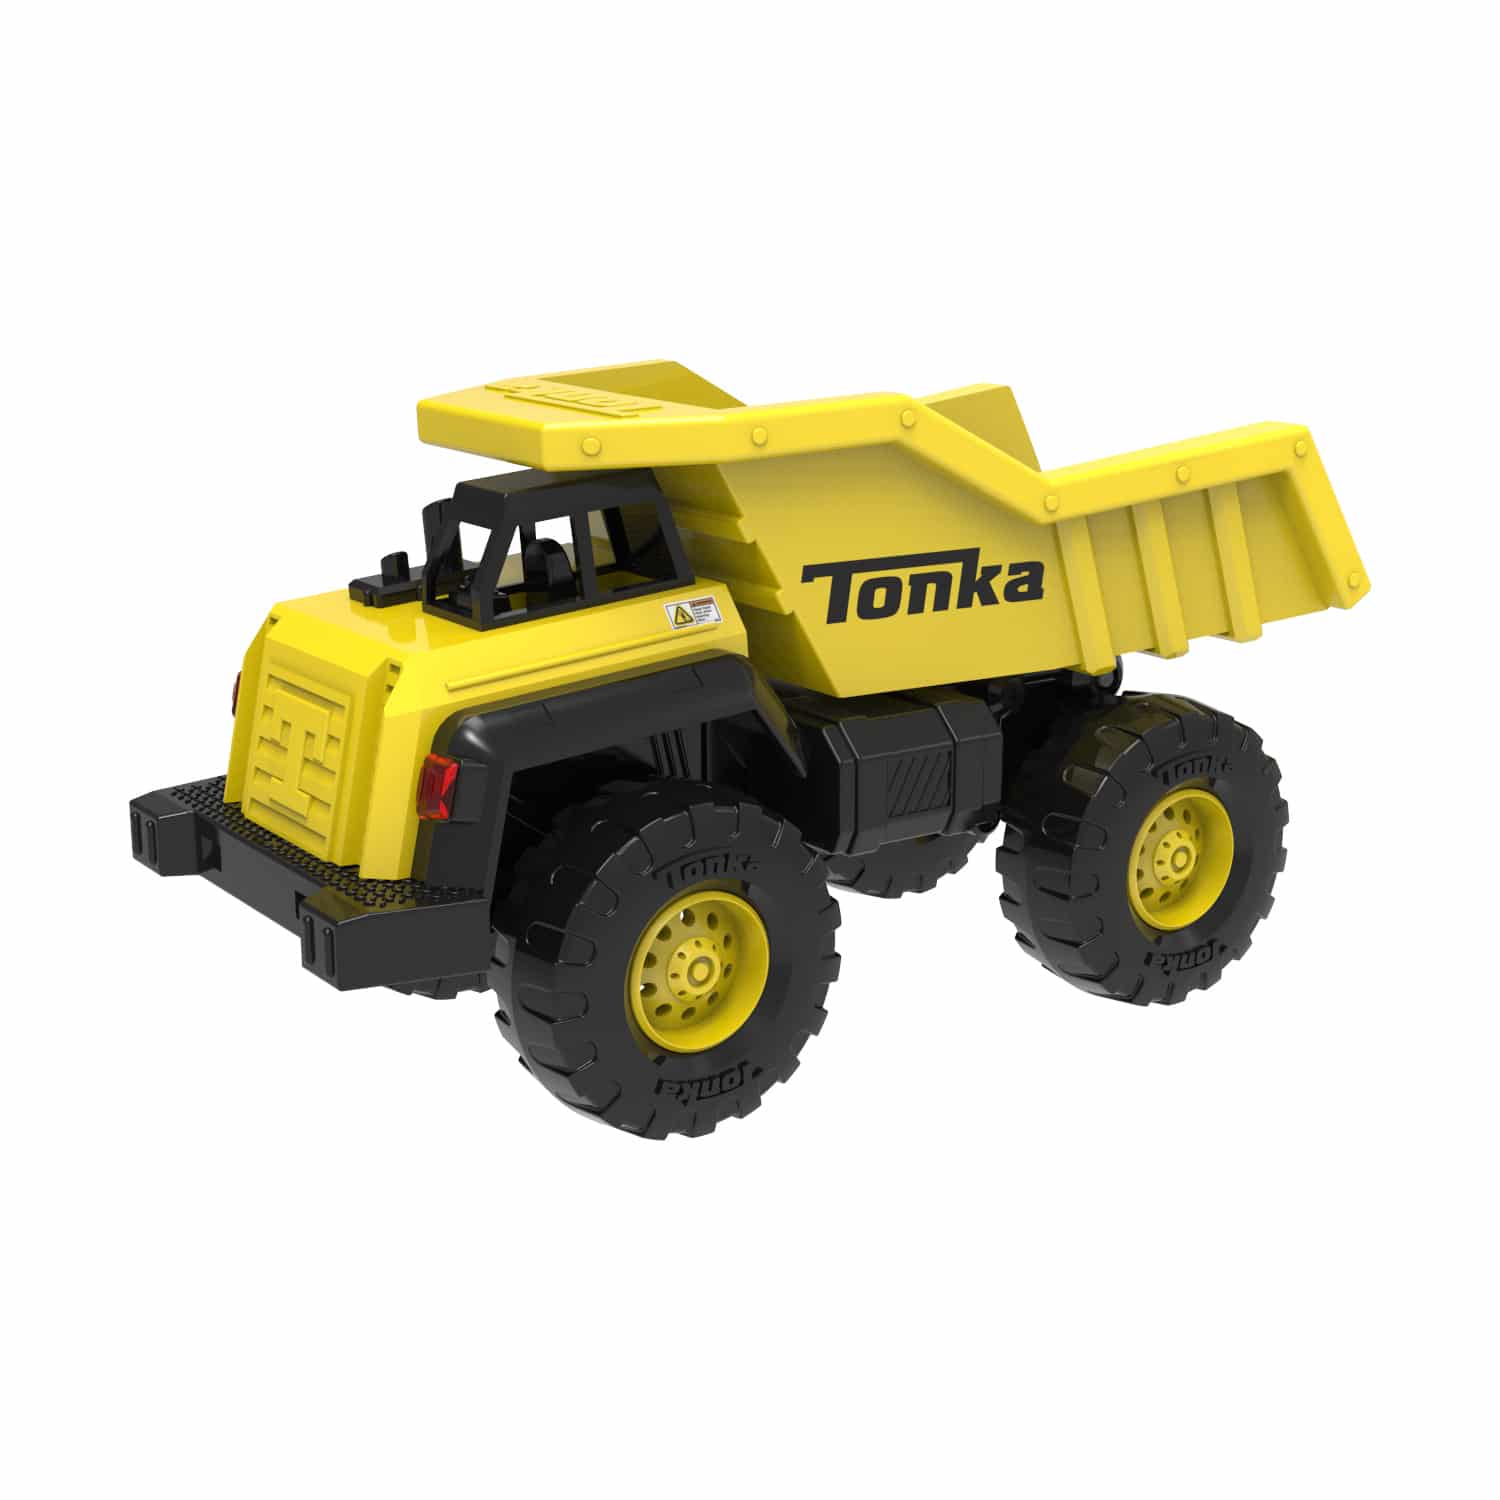 Front view of the yellow Tonka Mighty Metals Fleet in box.